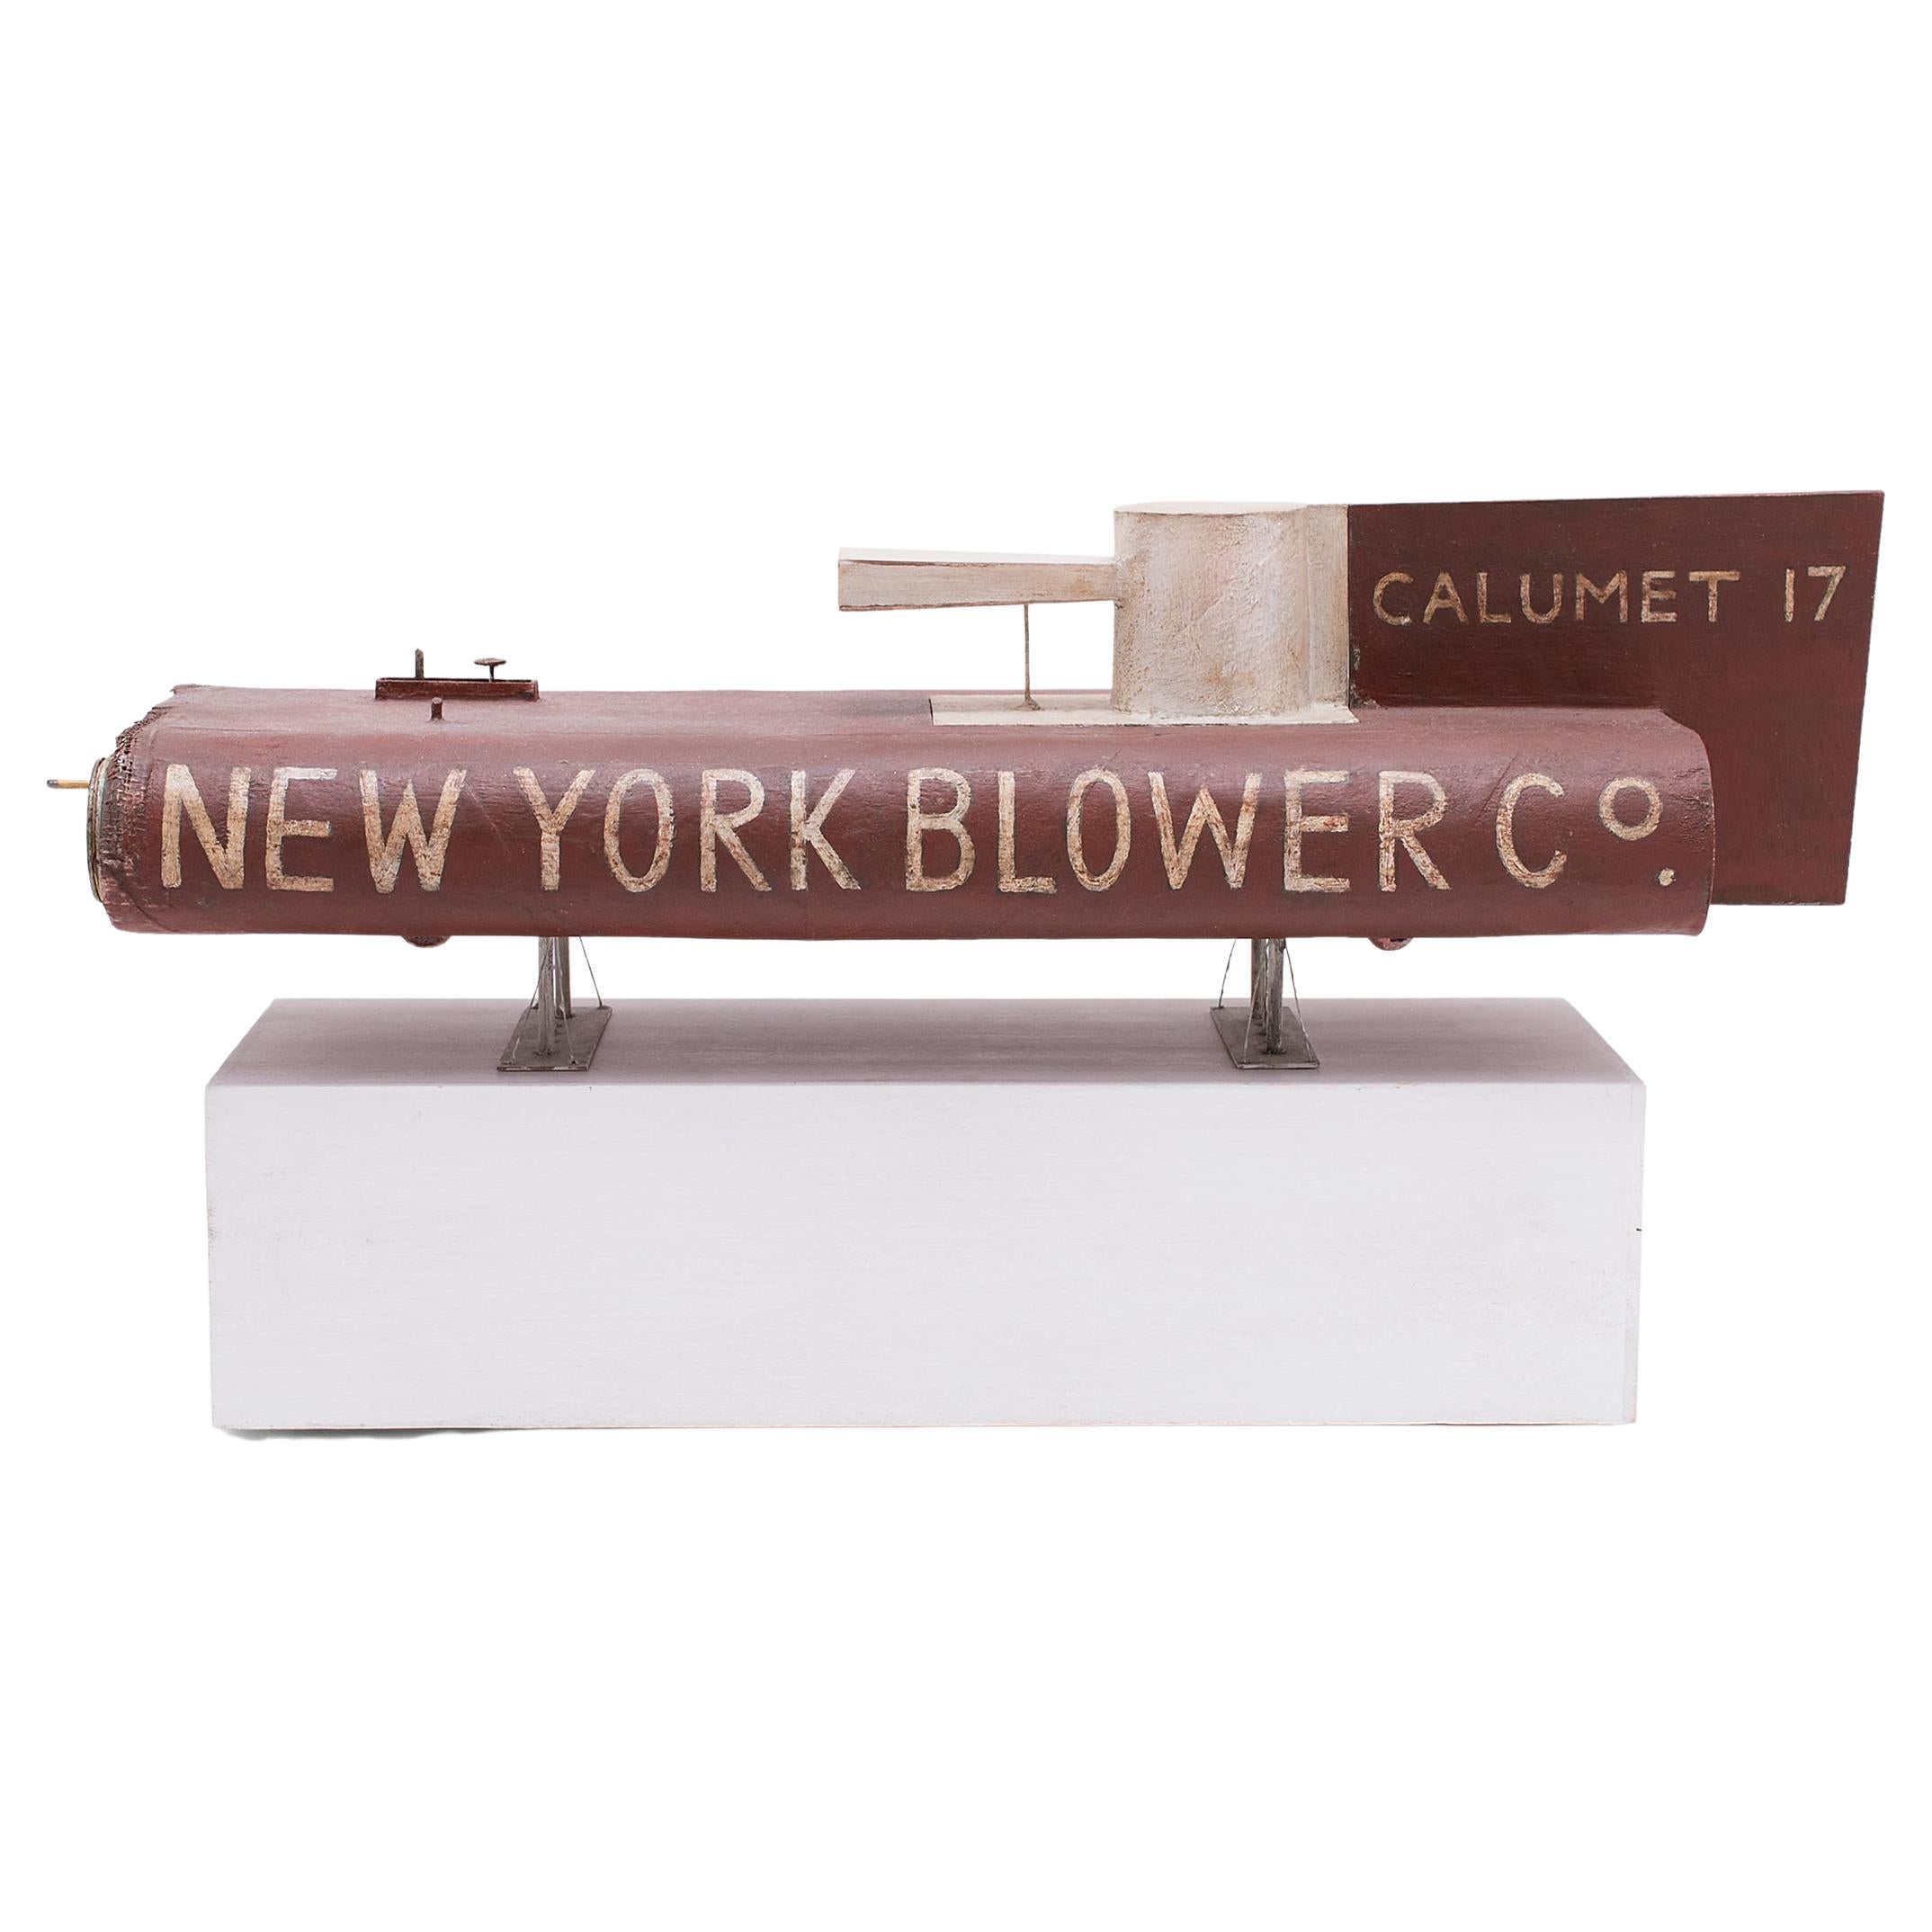 "New York Blower Car" by Patrick Fitzgerald For Sale